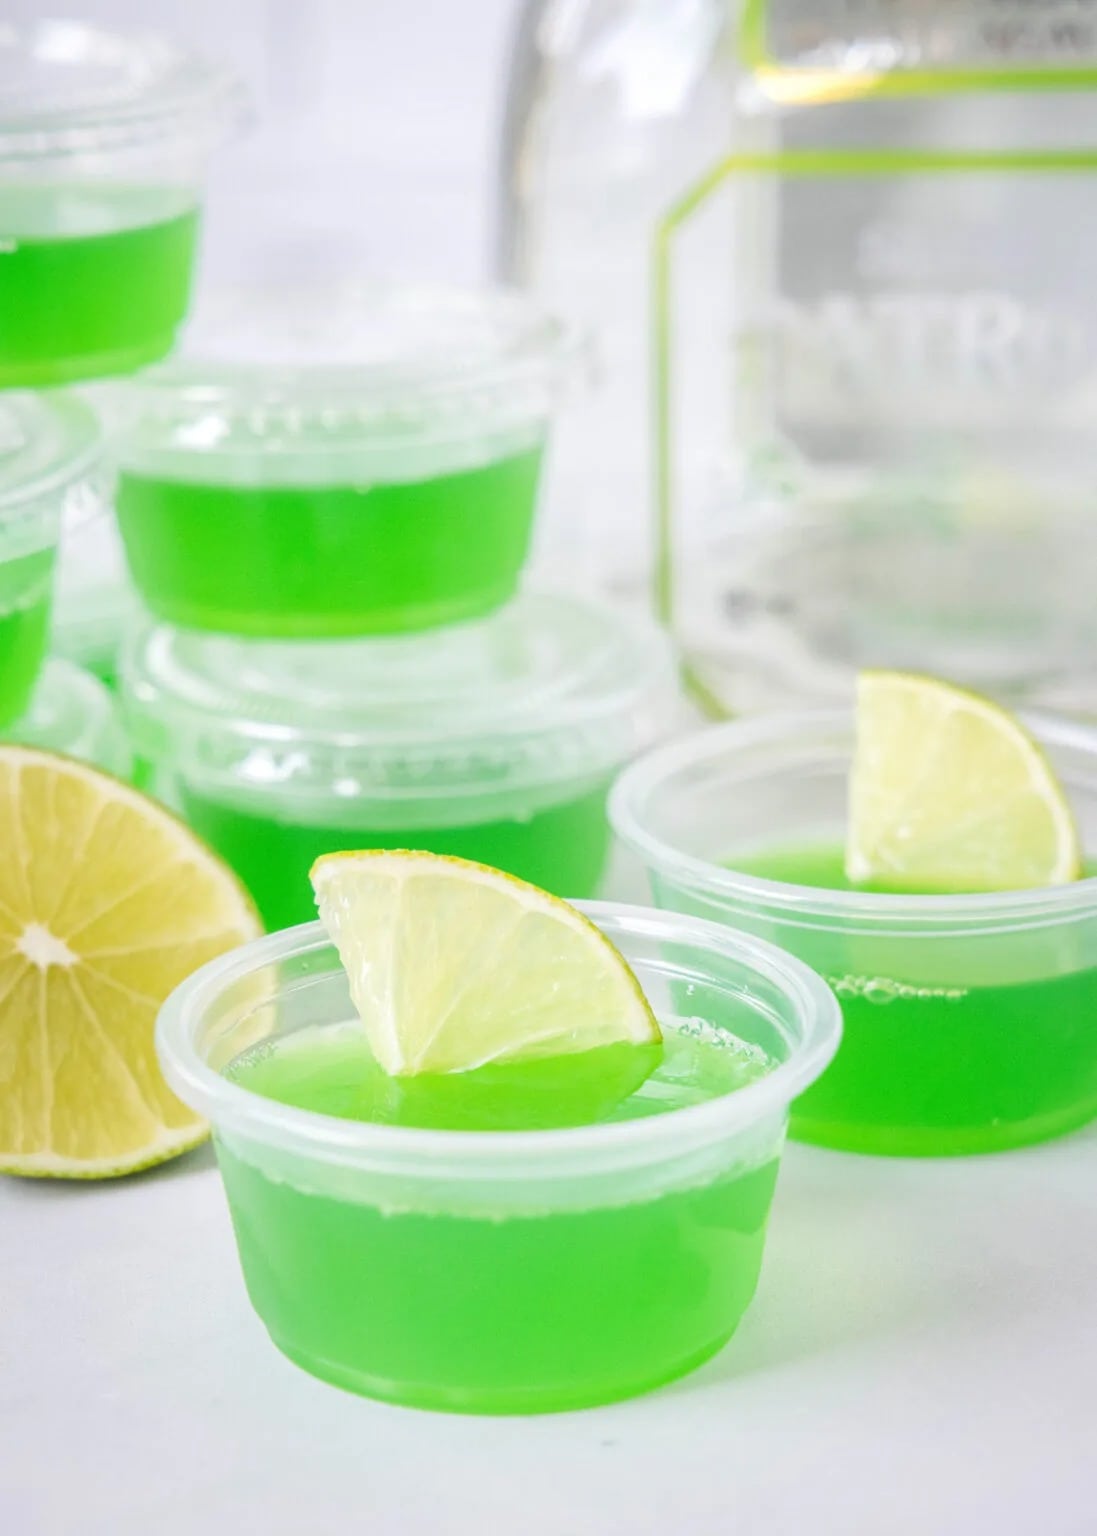 Green colored Margarita Jello shots garnished with lemon slices on a plastic cup. 